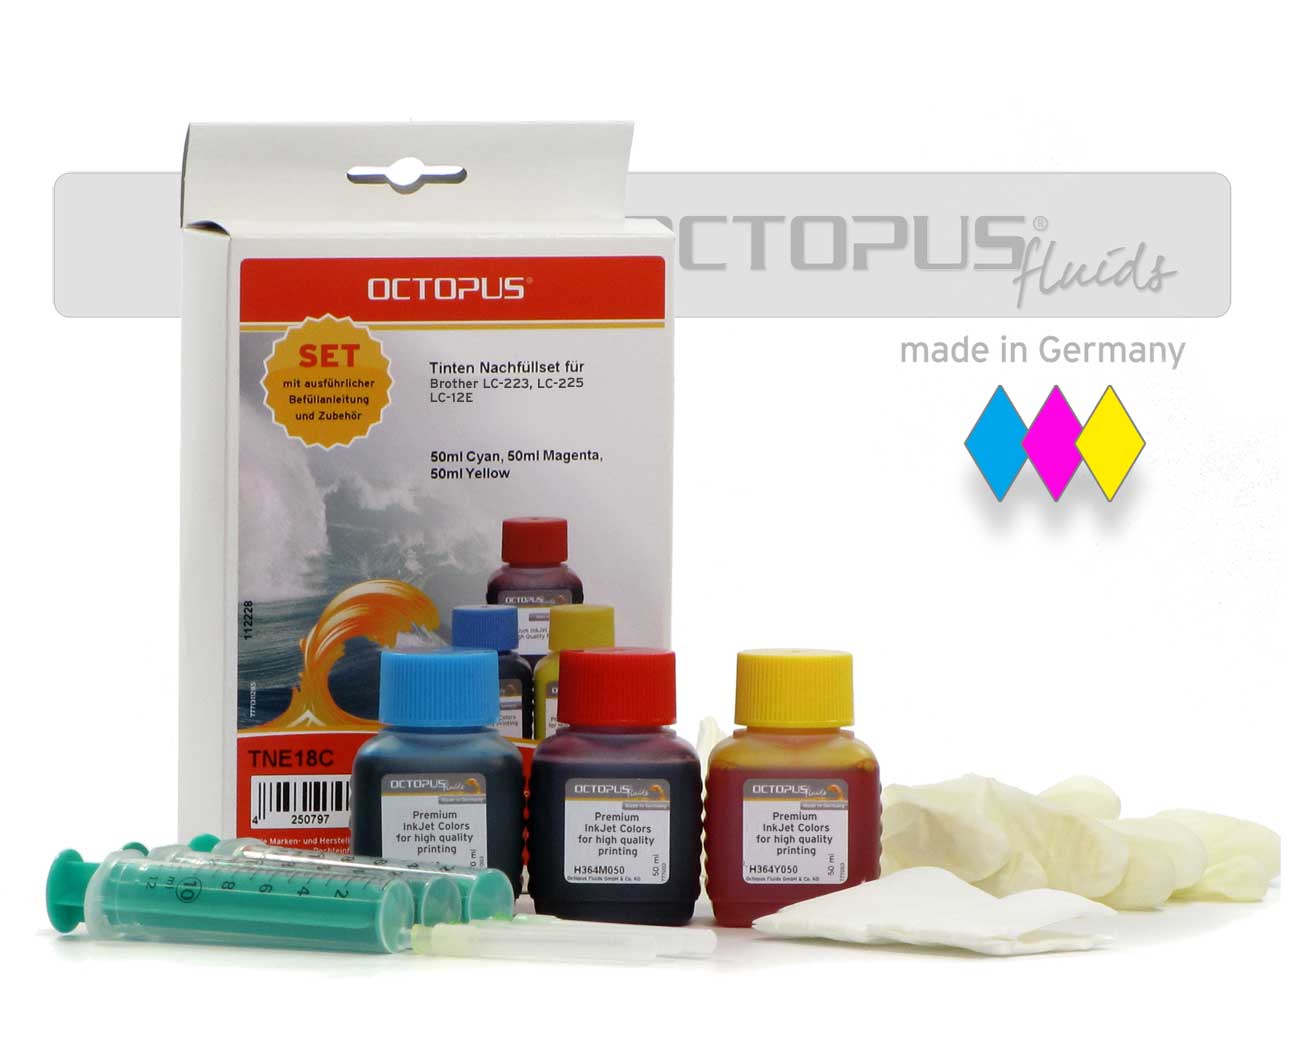 Sublimation Ink Refill Kit For Brother Printers That use the LC 3019 or LC  3017 Cartridges